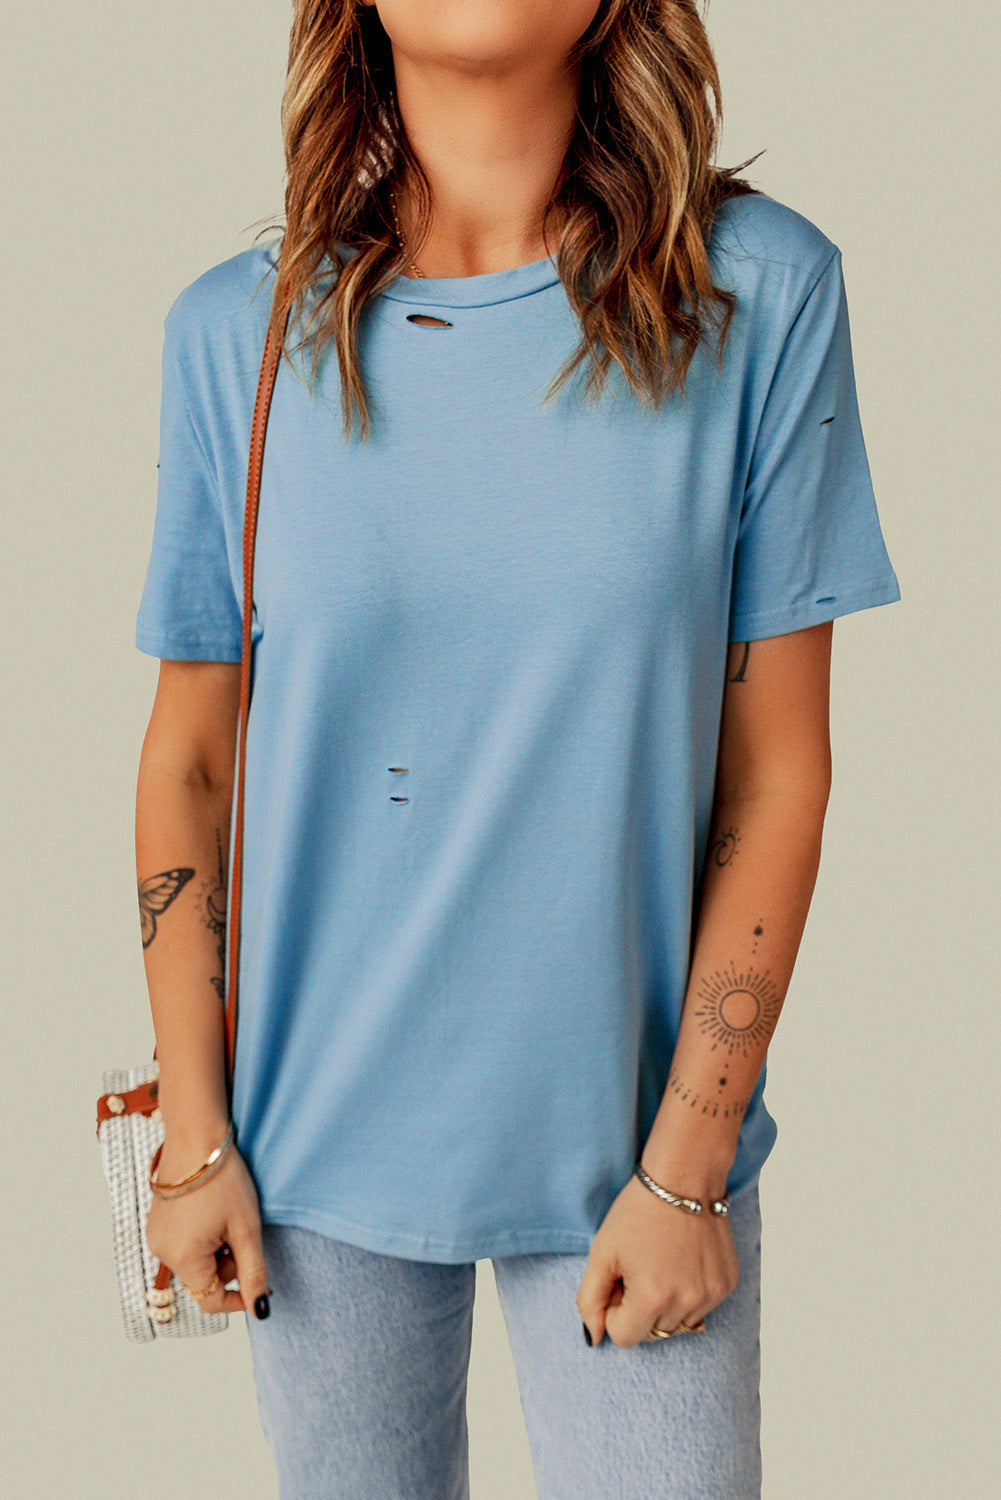 Distressed Round Neck Tee - Blue / S - T-Shirts - Shirts & Tops - 13 - 2024